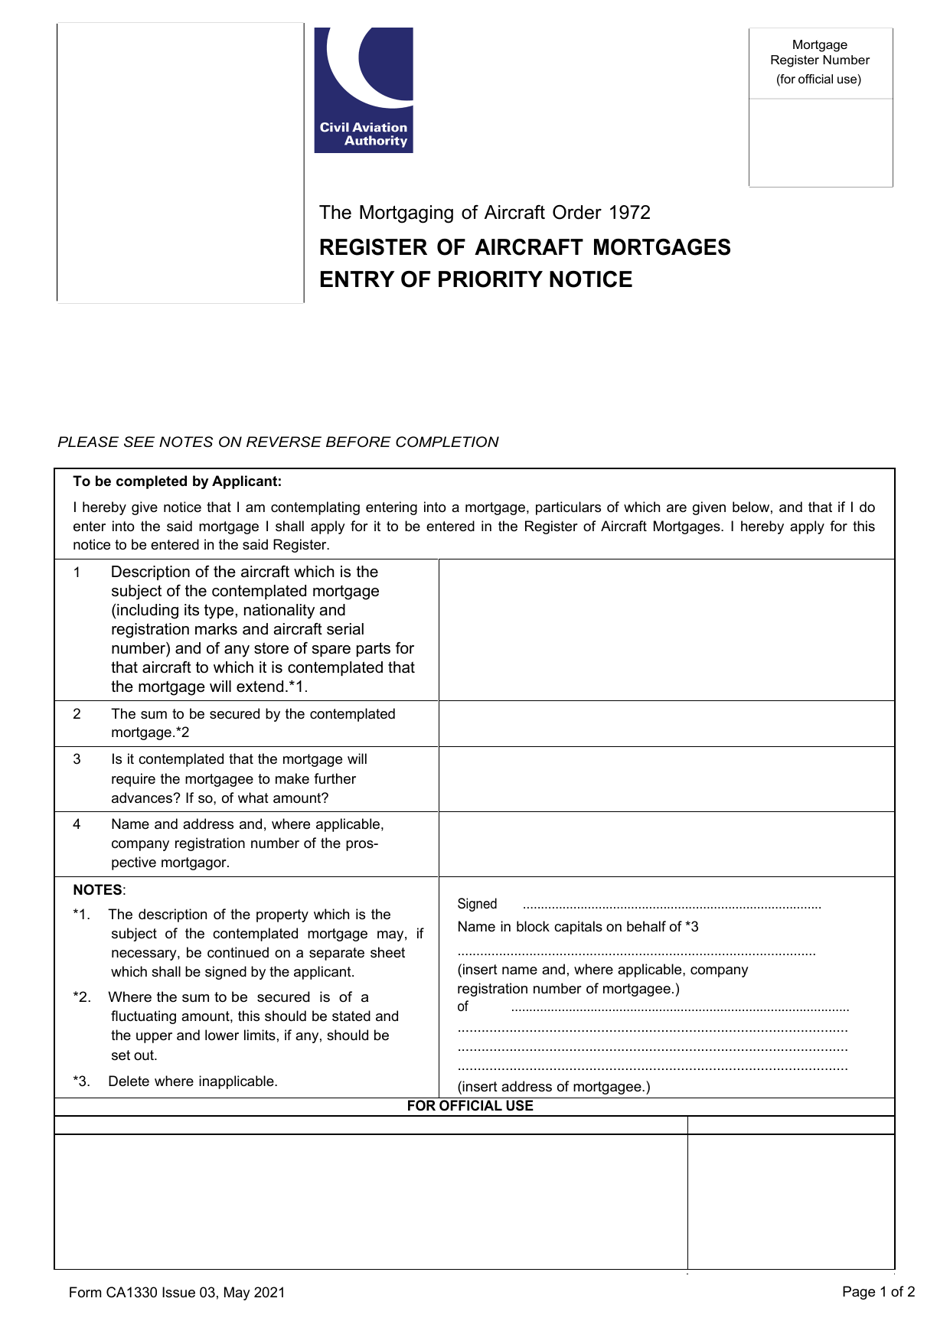 Form CA1330 Entry of Priority Notice - United Kingdom, Page 1